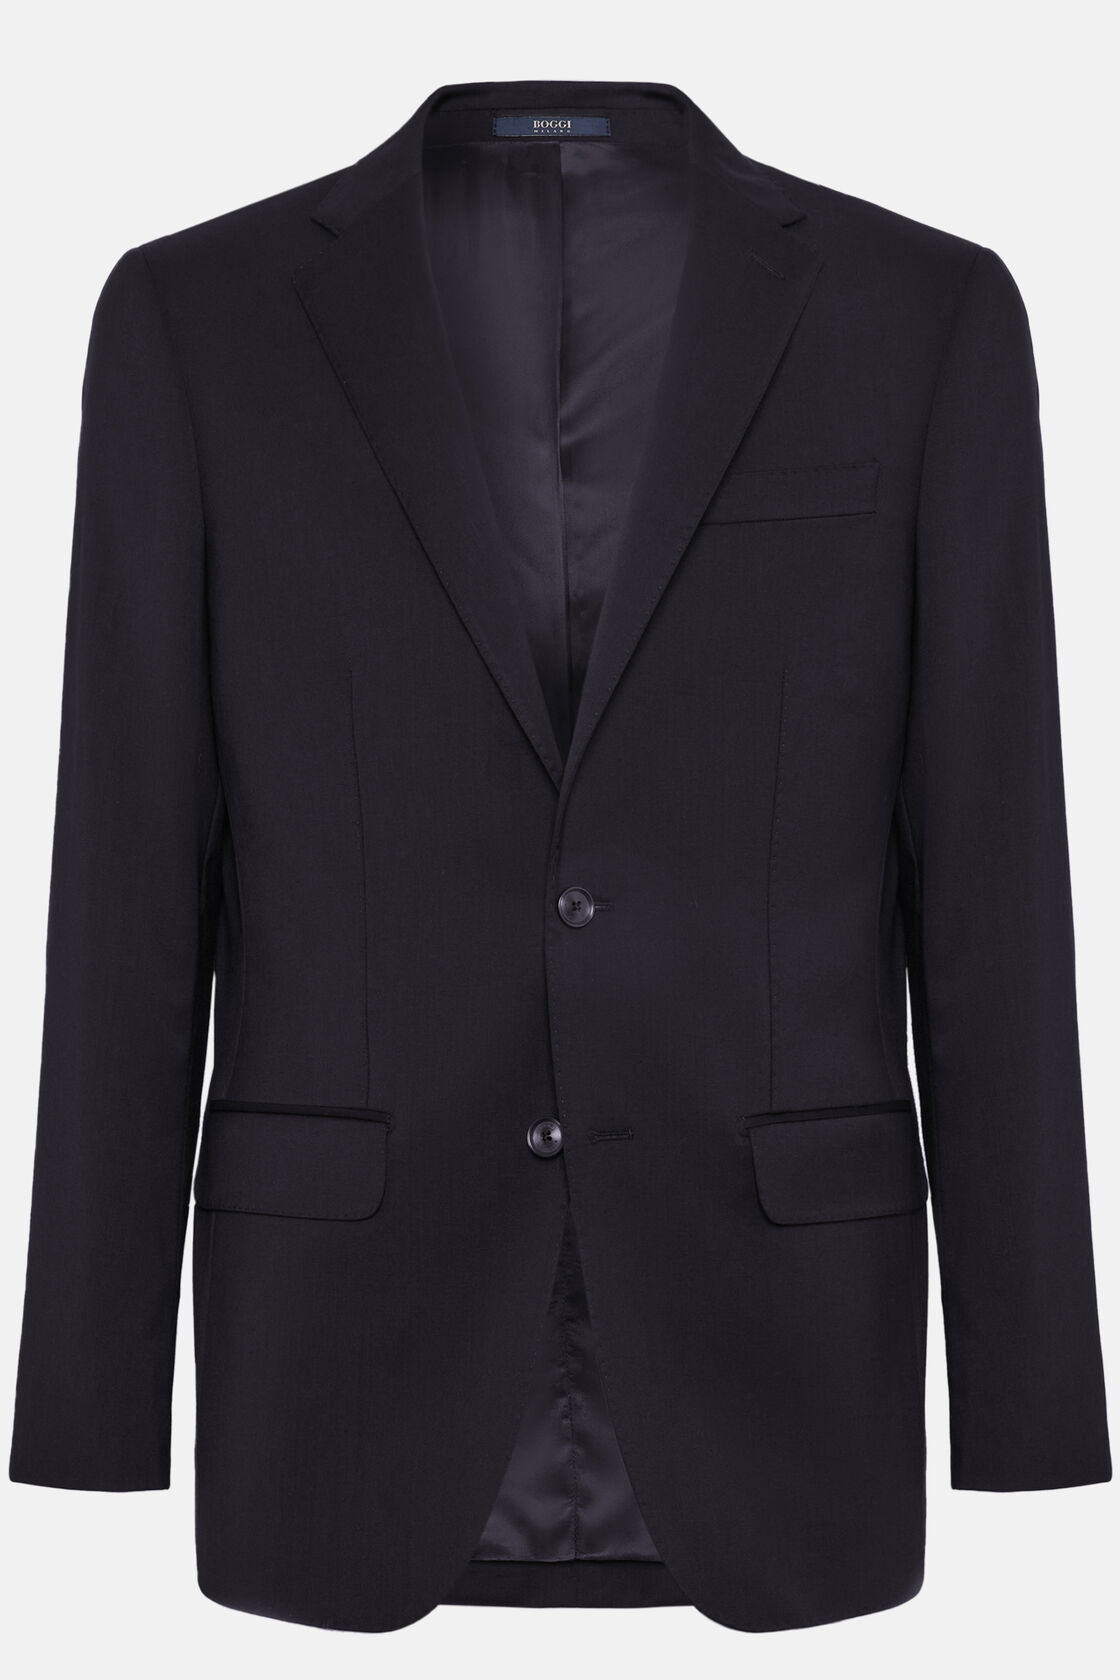 Navy Stretch Wool Twill Suit, , hi-res